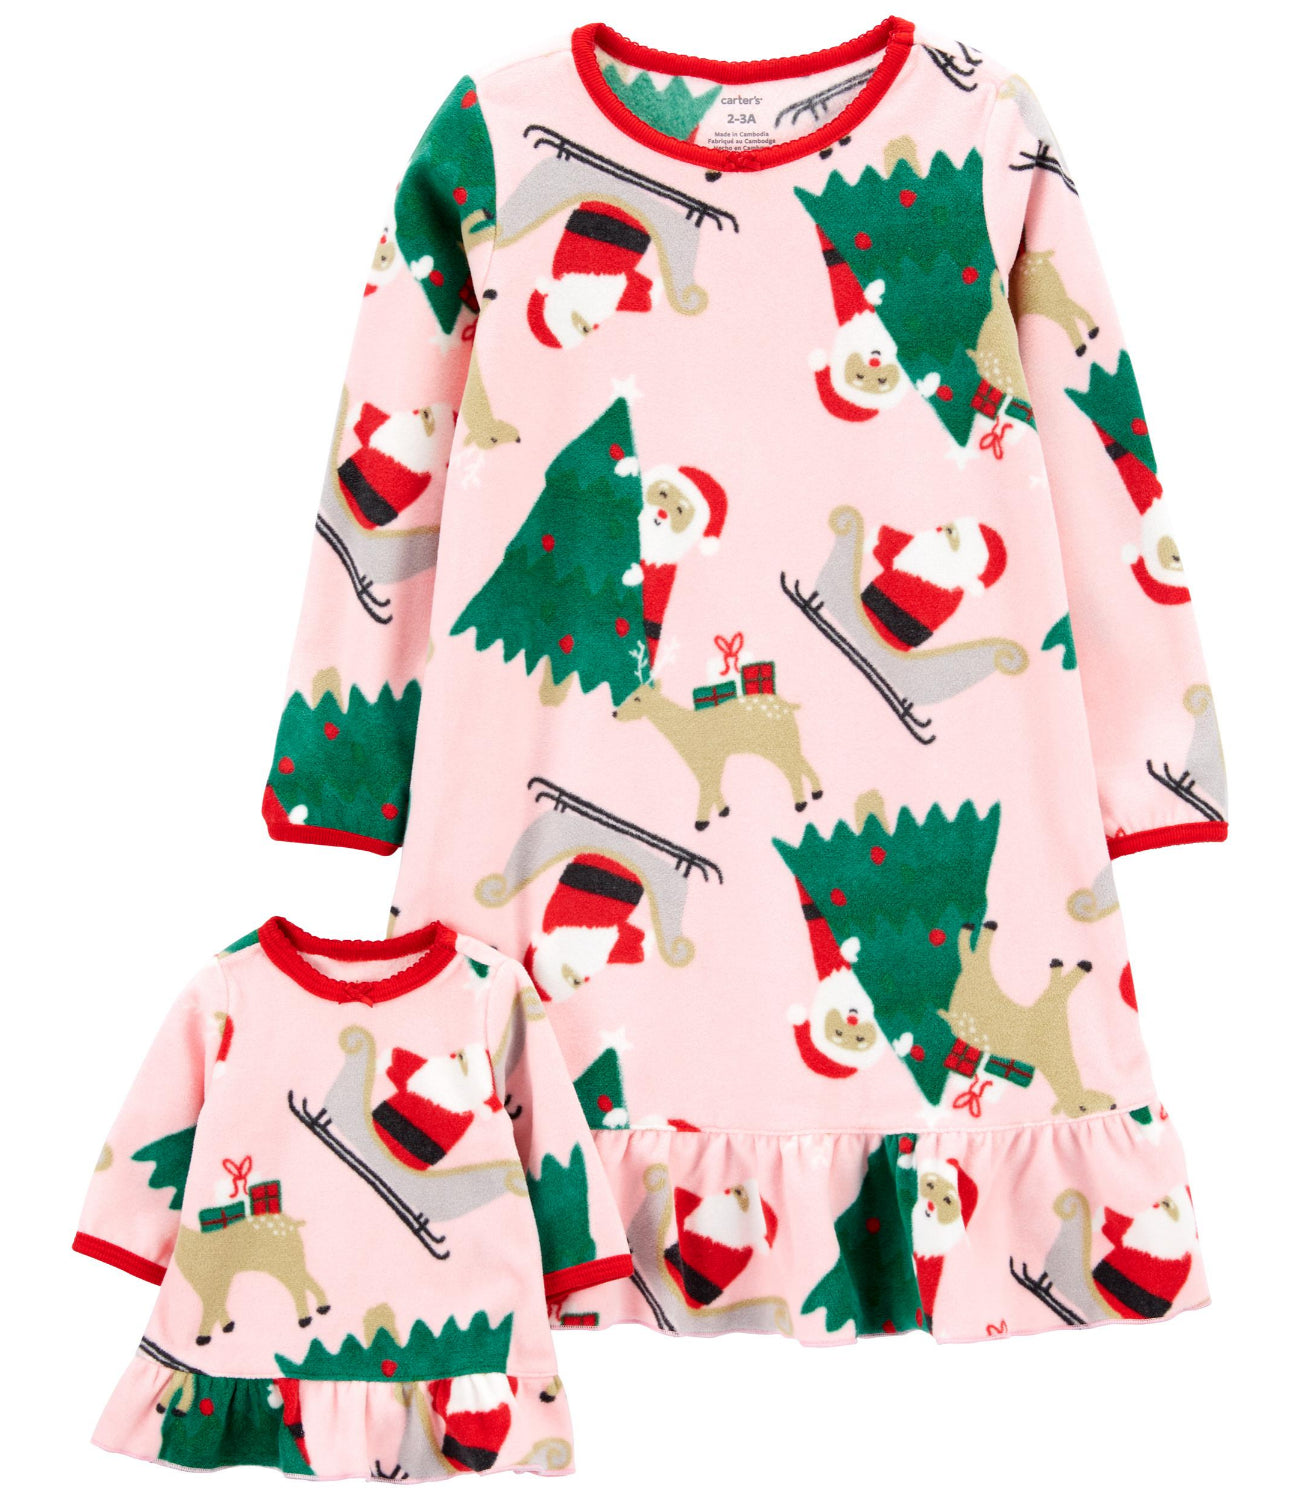 Carters Girls 2T-5T Christmas Matching Nightgown & Doll Nightgown Set